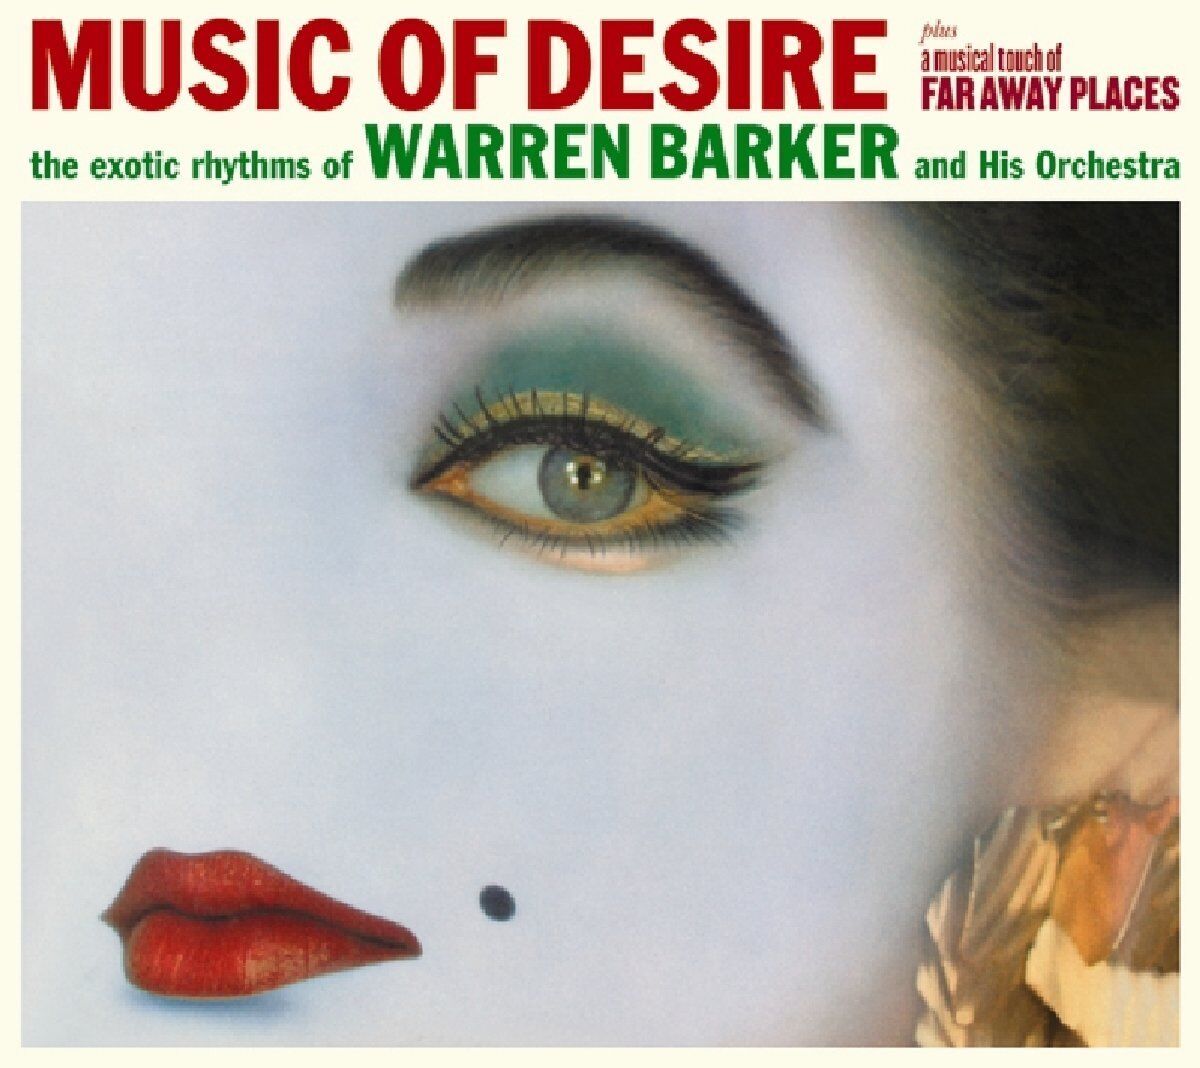 Warren Barker: MUSIC OF DESIRE + A MUSICAL TOUCH OF FAR AWAY PLACES